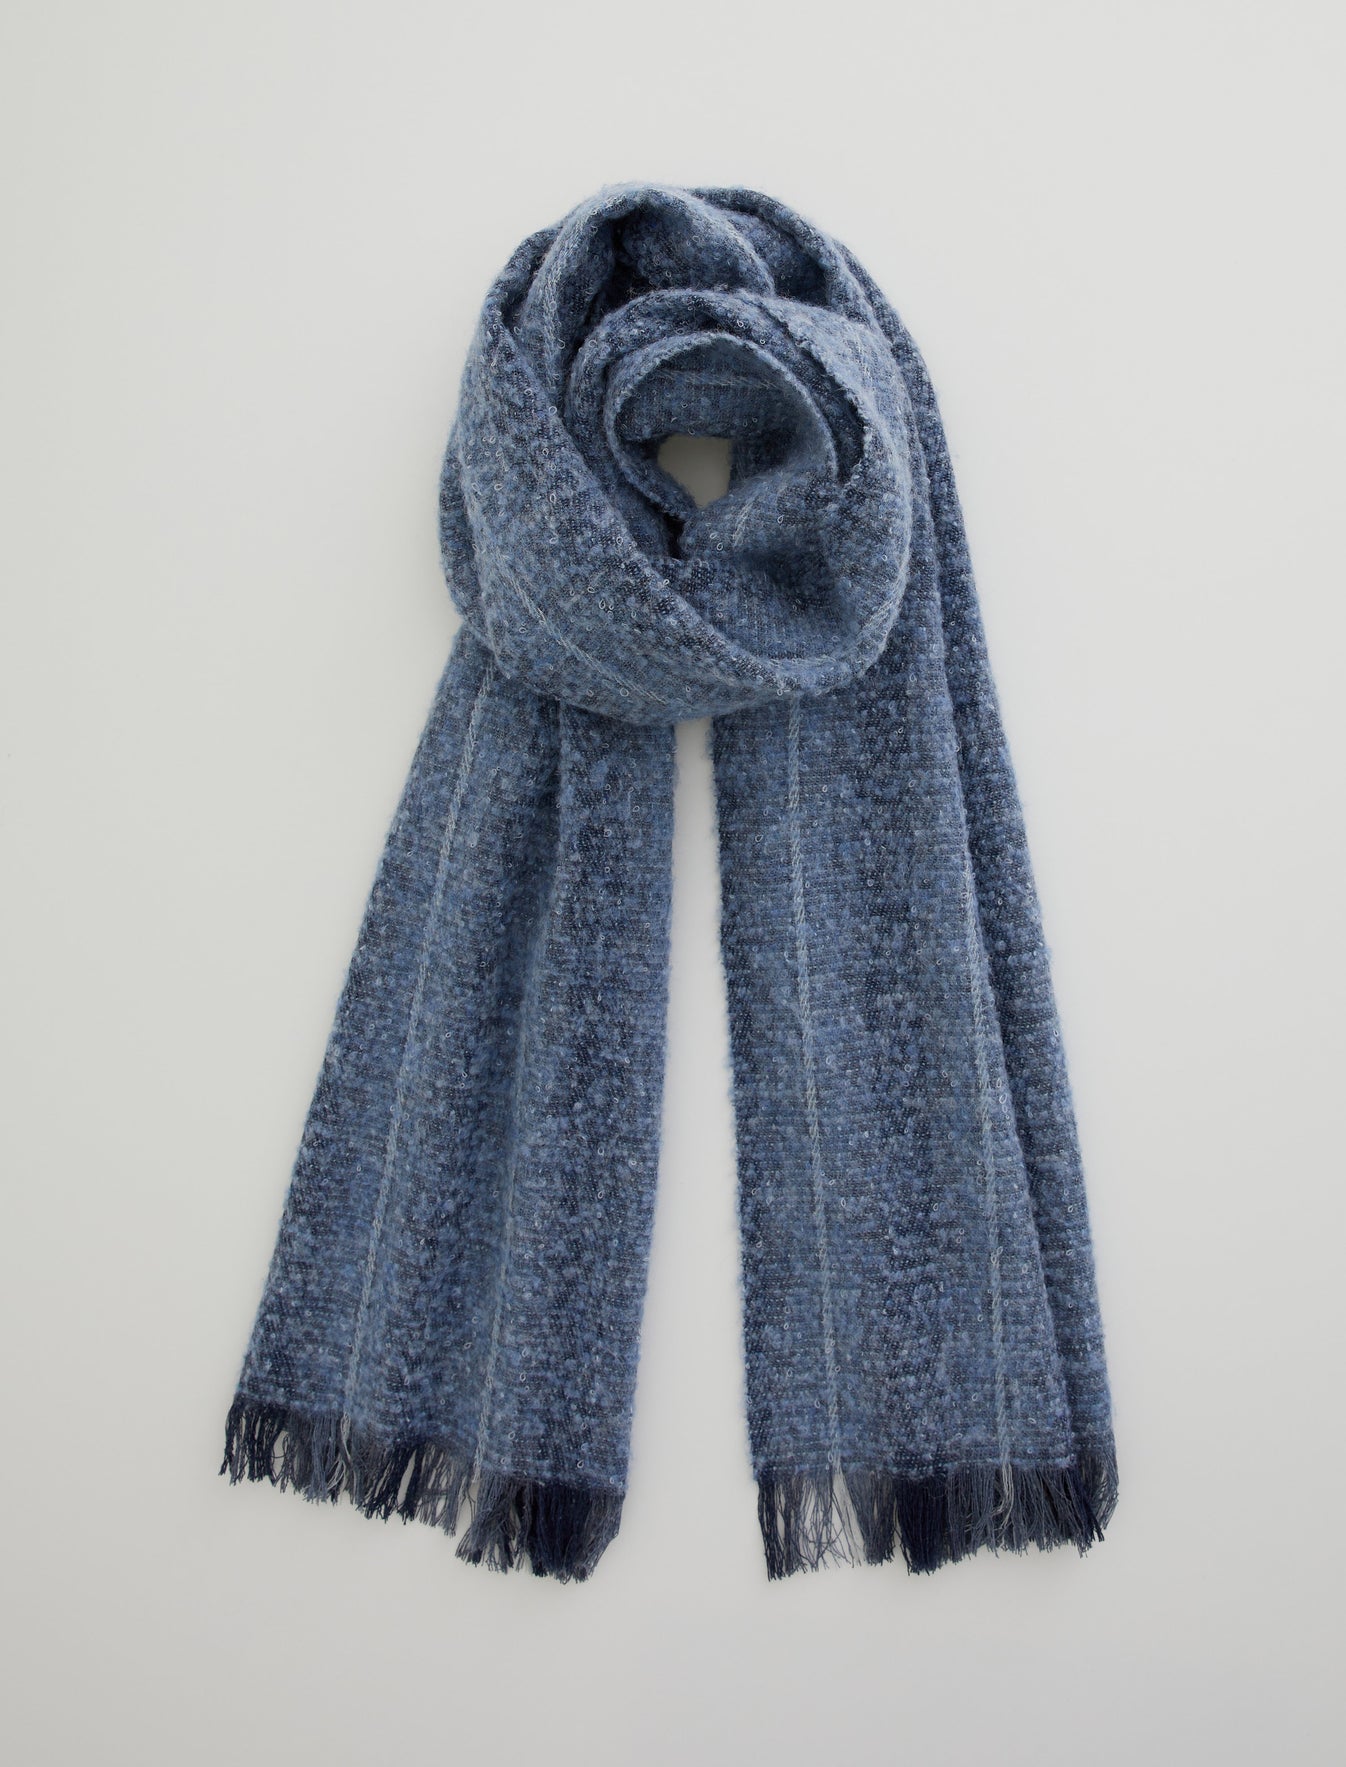 at AG Official Store Jeans Wool Accessory Scarf Indigo Arden Stripe